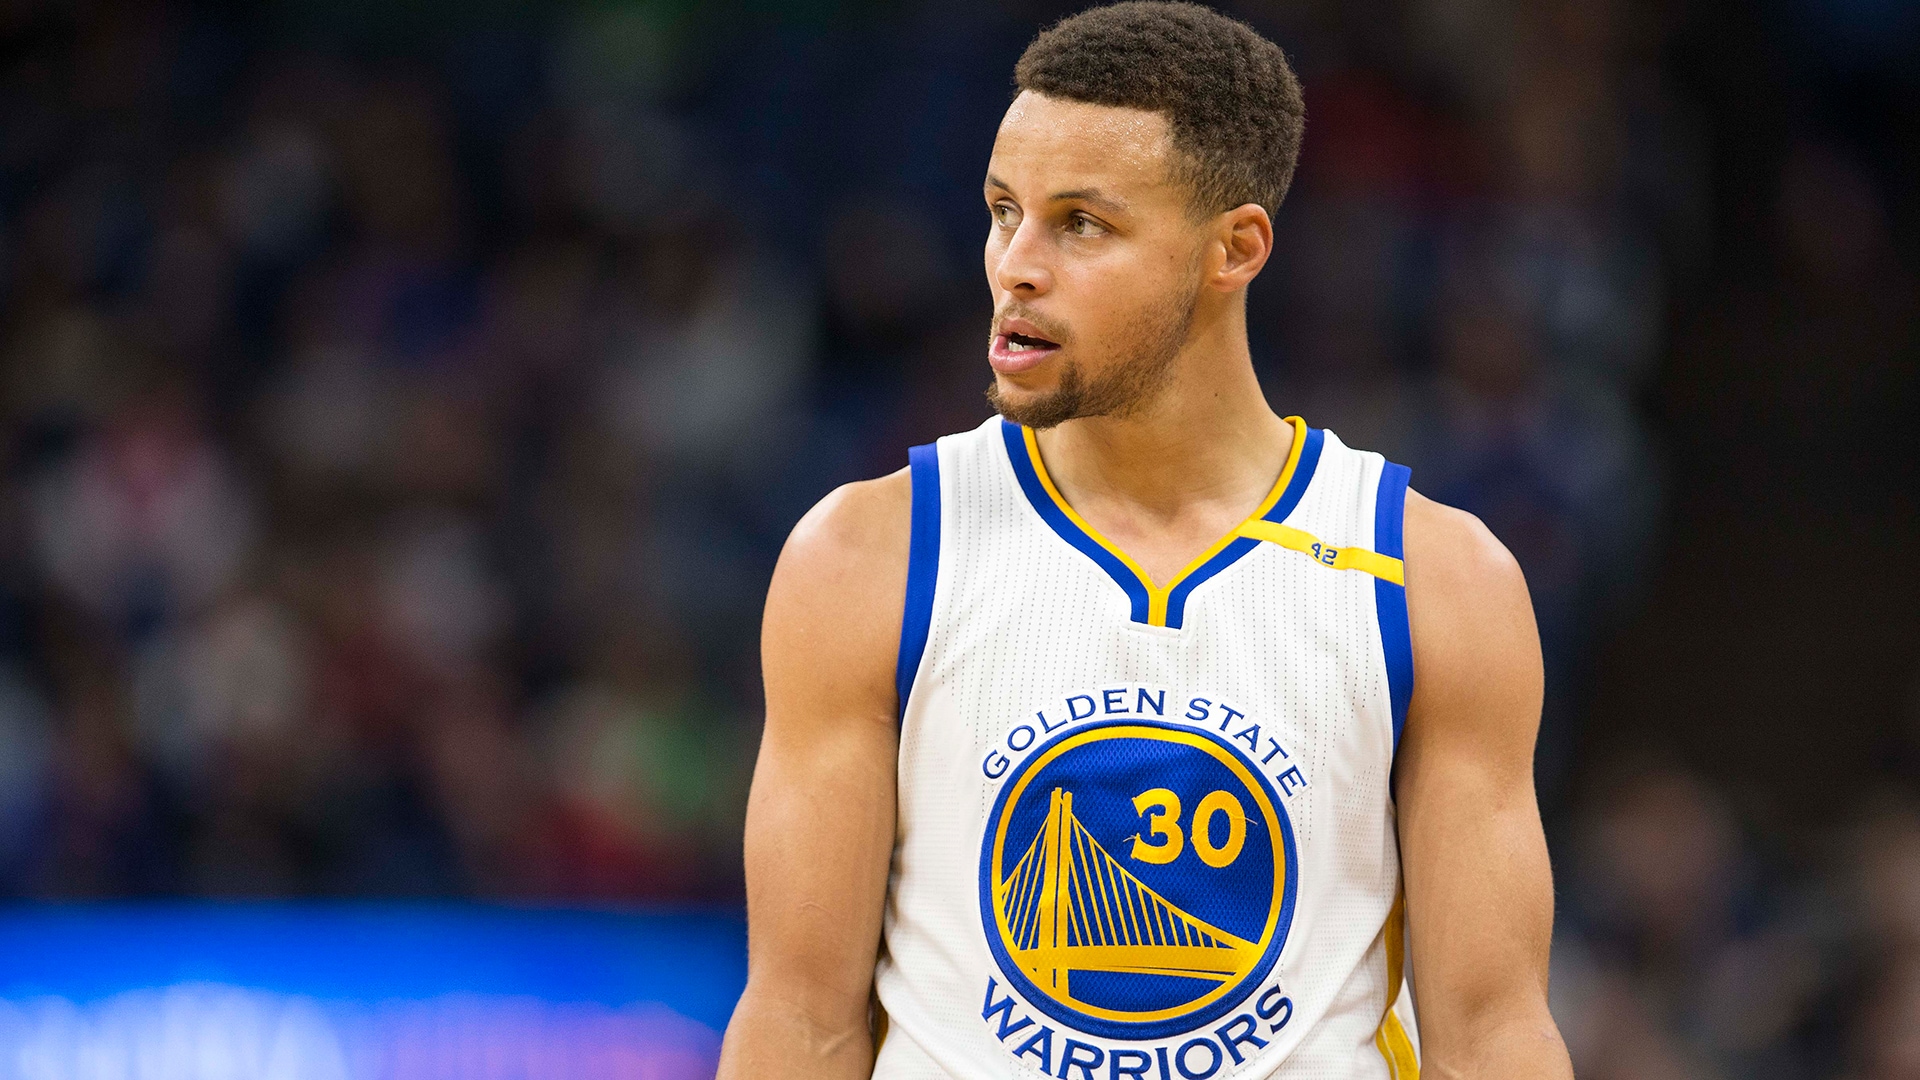 The pre-game routine that makes Steph Curry the best in the NBA, Stephen  Curry